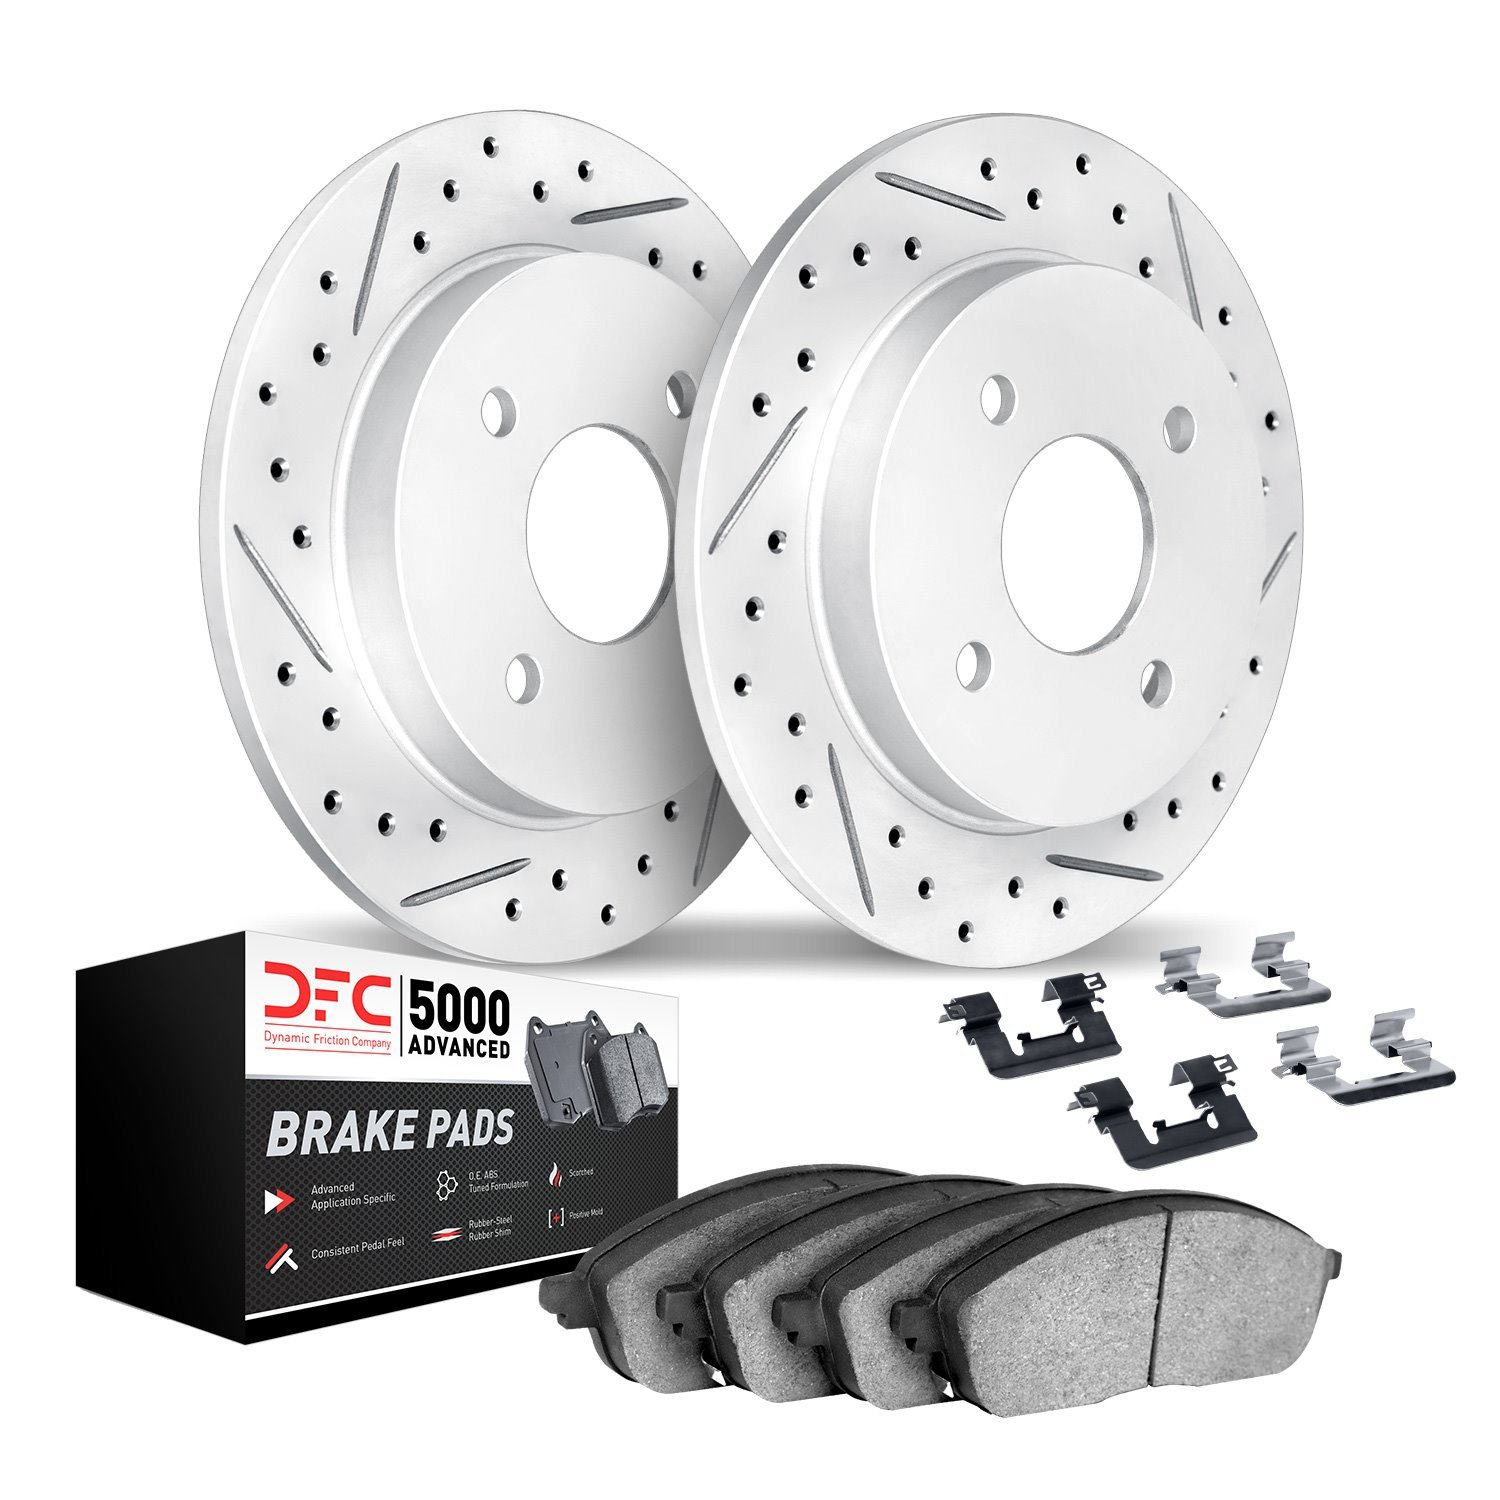 2512-54161 Geoperformance Drilled/Slotted Rotors w/5000 Advanced Brake Pads Kit & Hardware, Fits Select Ford/Lincoln/Mercury/Maz